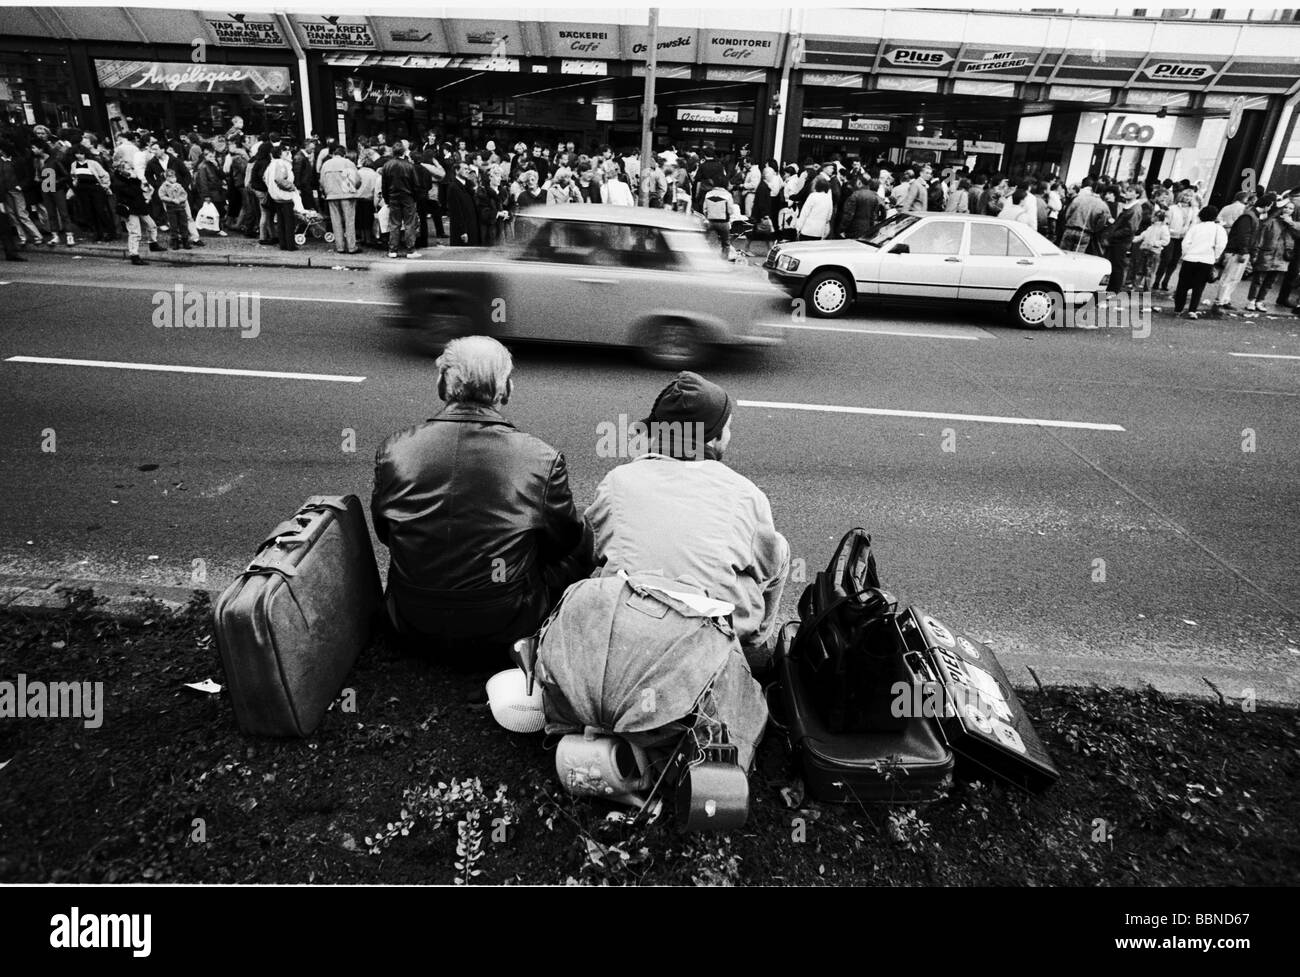 geography / travel, Germany, reunification, Berlin, people who left the GDR, sitting with luggage on roadside, West-Berlin, 11.11.1989, East Germany, historic, historical, East-Germany, West, Berlin Wall, fall, down, opening, freedom, crowd of people standing line up at shops, Trabant, car, street, 1980s, 80s, 20th century, leaving the country, November'89, November 89, men, man, male, woman, women, female, Stock Photo